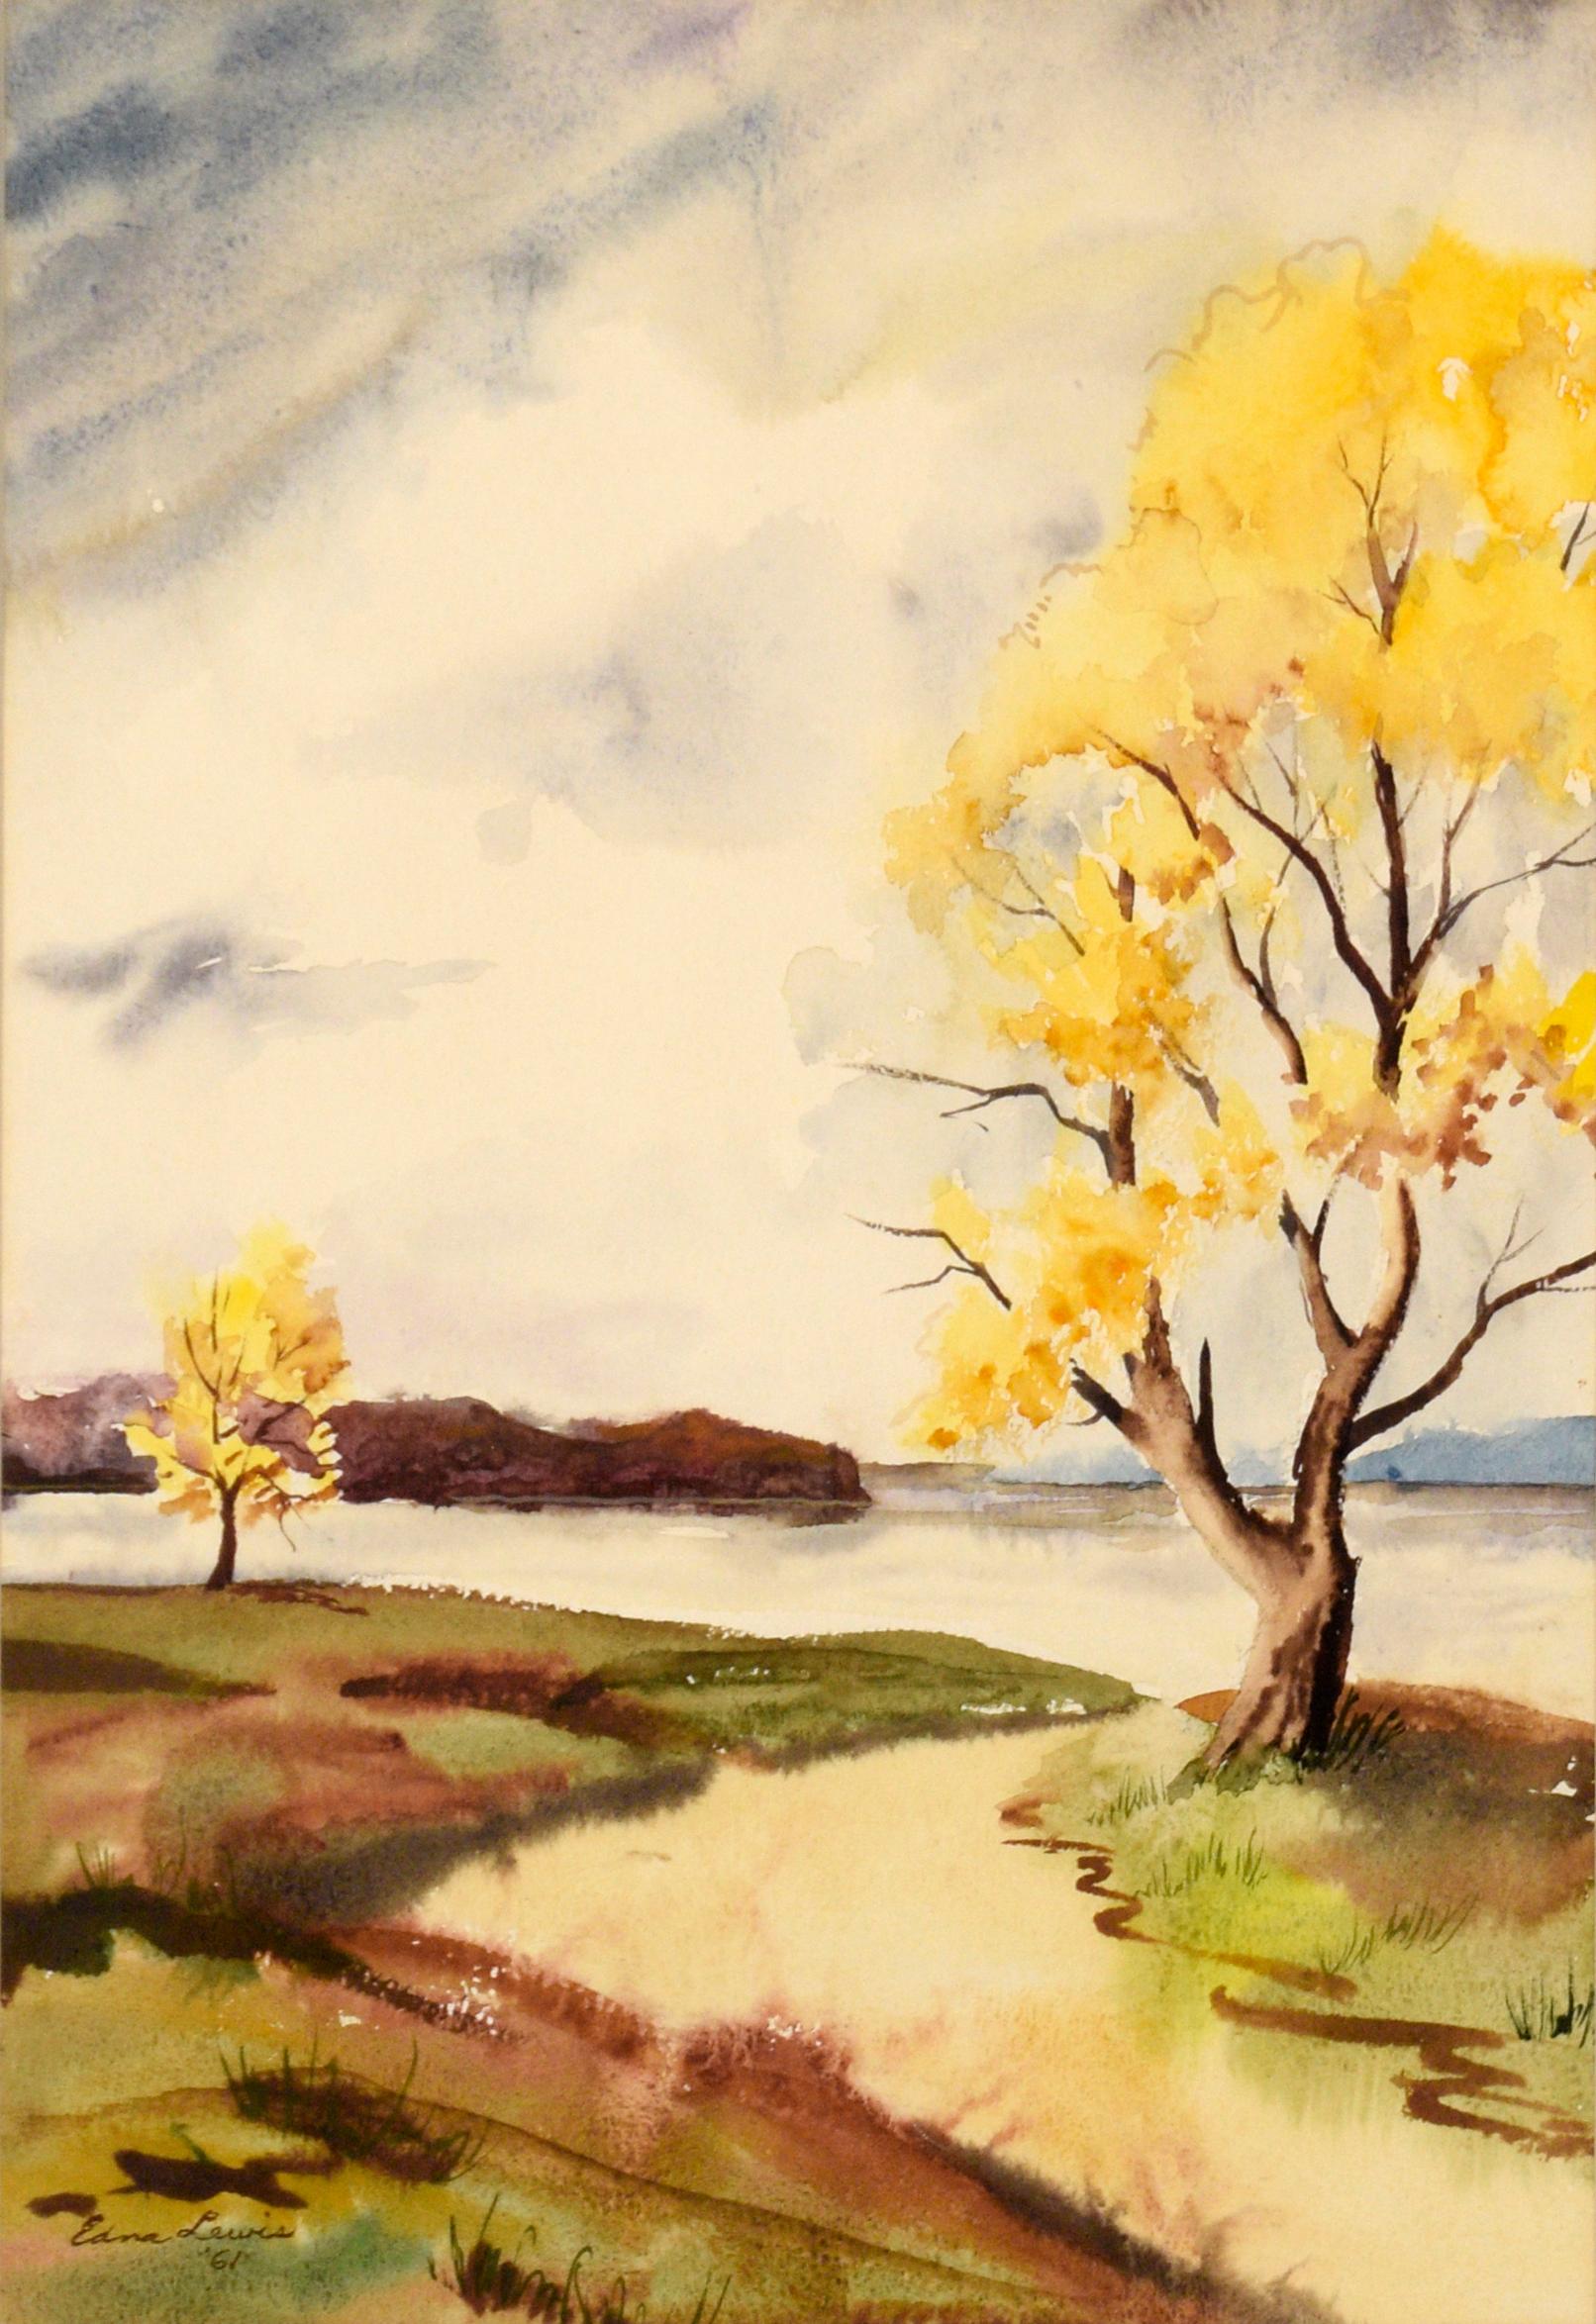 Lake Landscape with Yellow Trees - Watercolor on Paper - Art by Edna Evelyn Sutherland Lewis